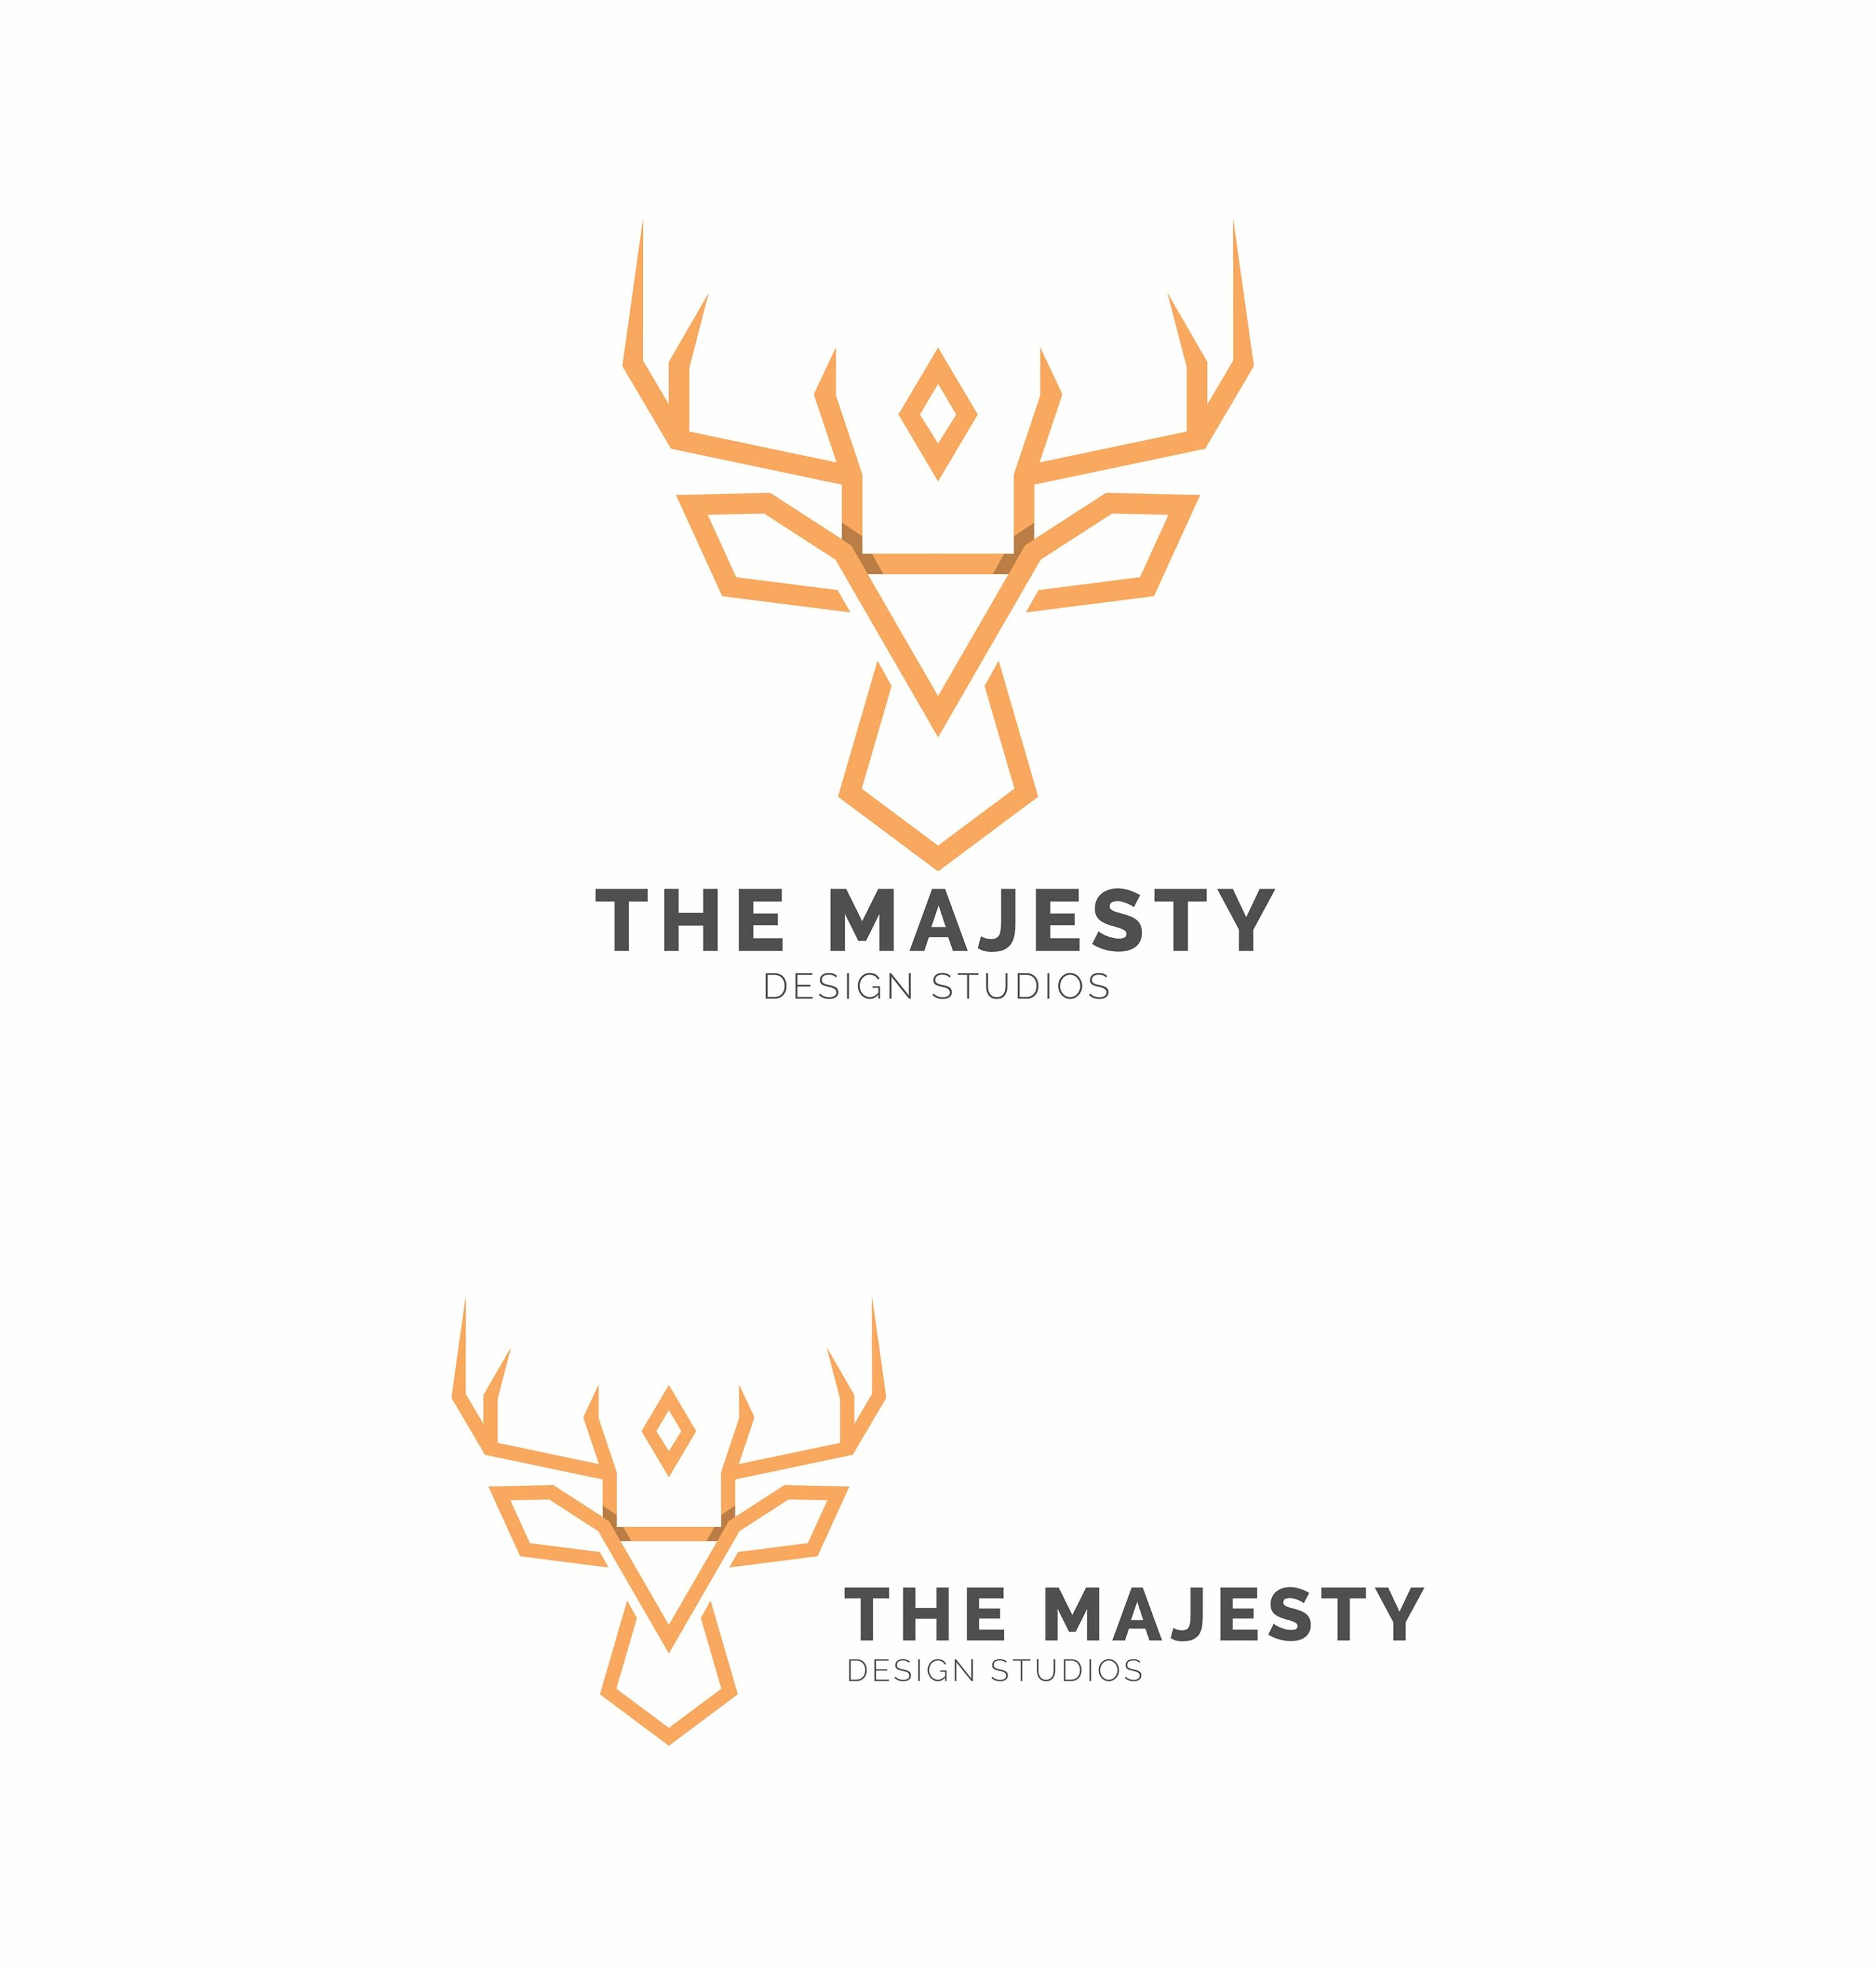 White background with luxury gold deer logo.